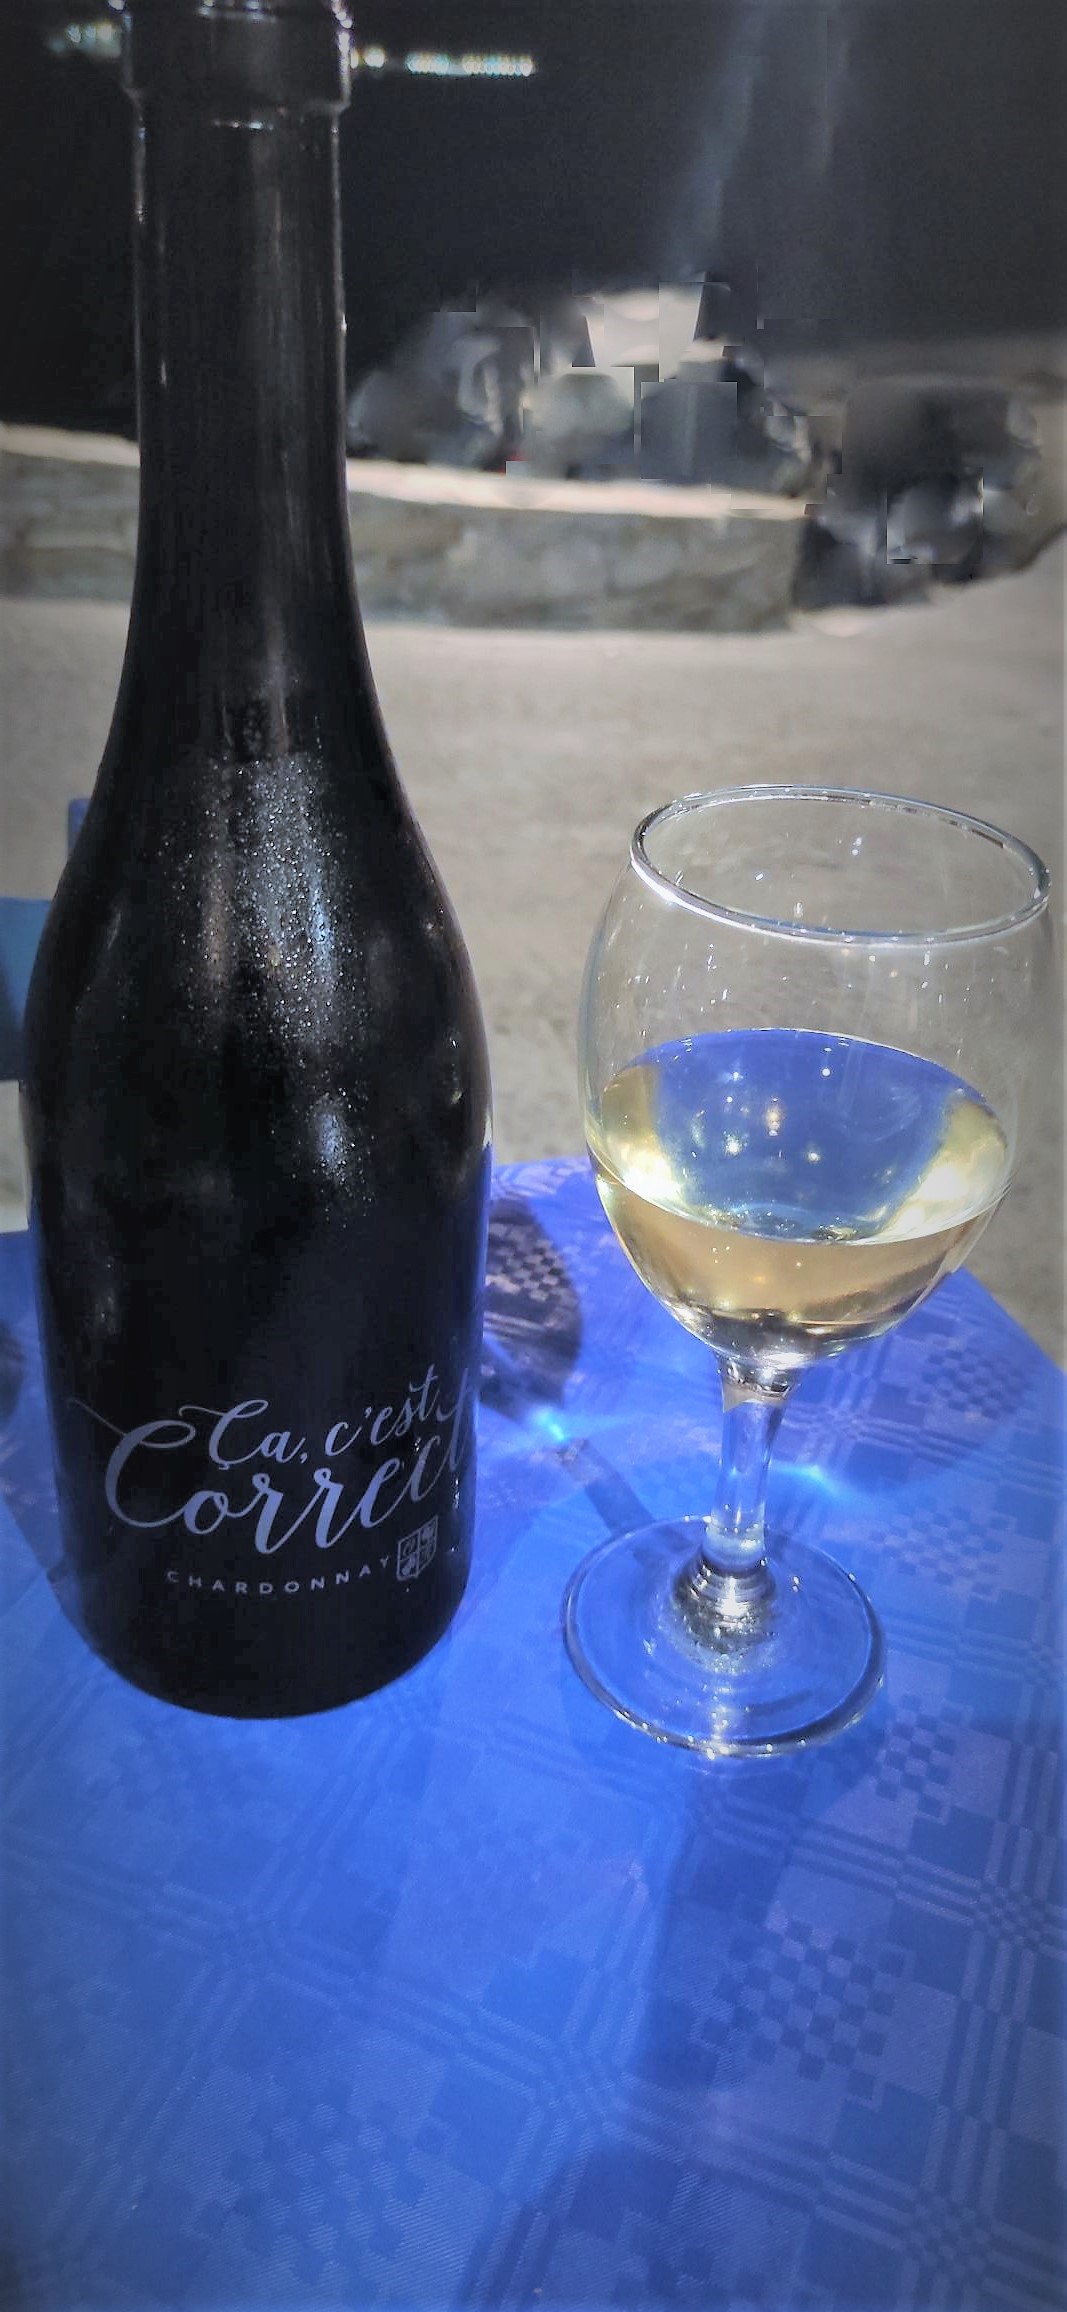 Read more about the article Ca c’est Correct Chardonnay 2019 – Κτήμα Παπαργυρίου